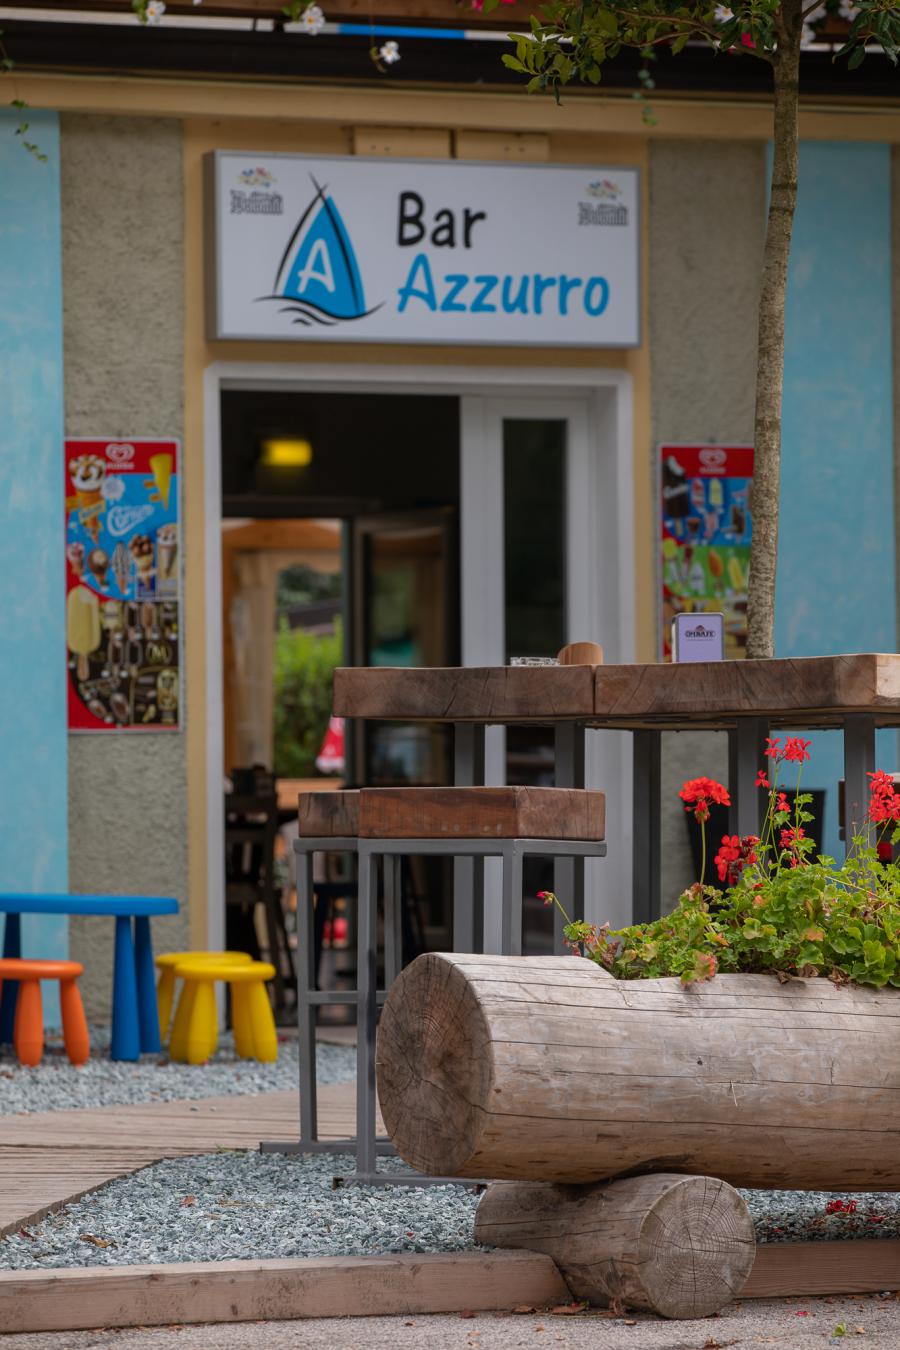 Camping Azzurro - Bar for breaakfast, lunch and aperitifs